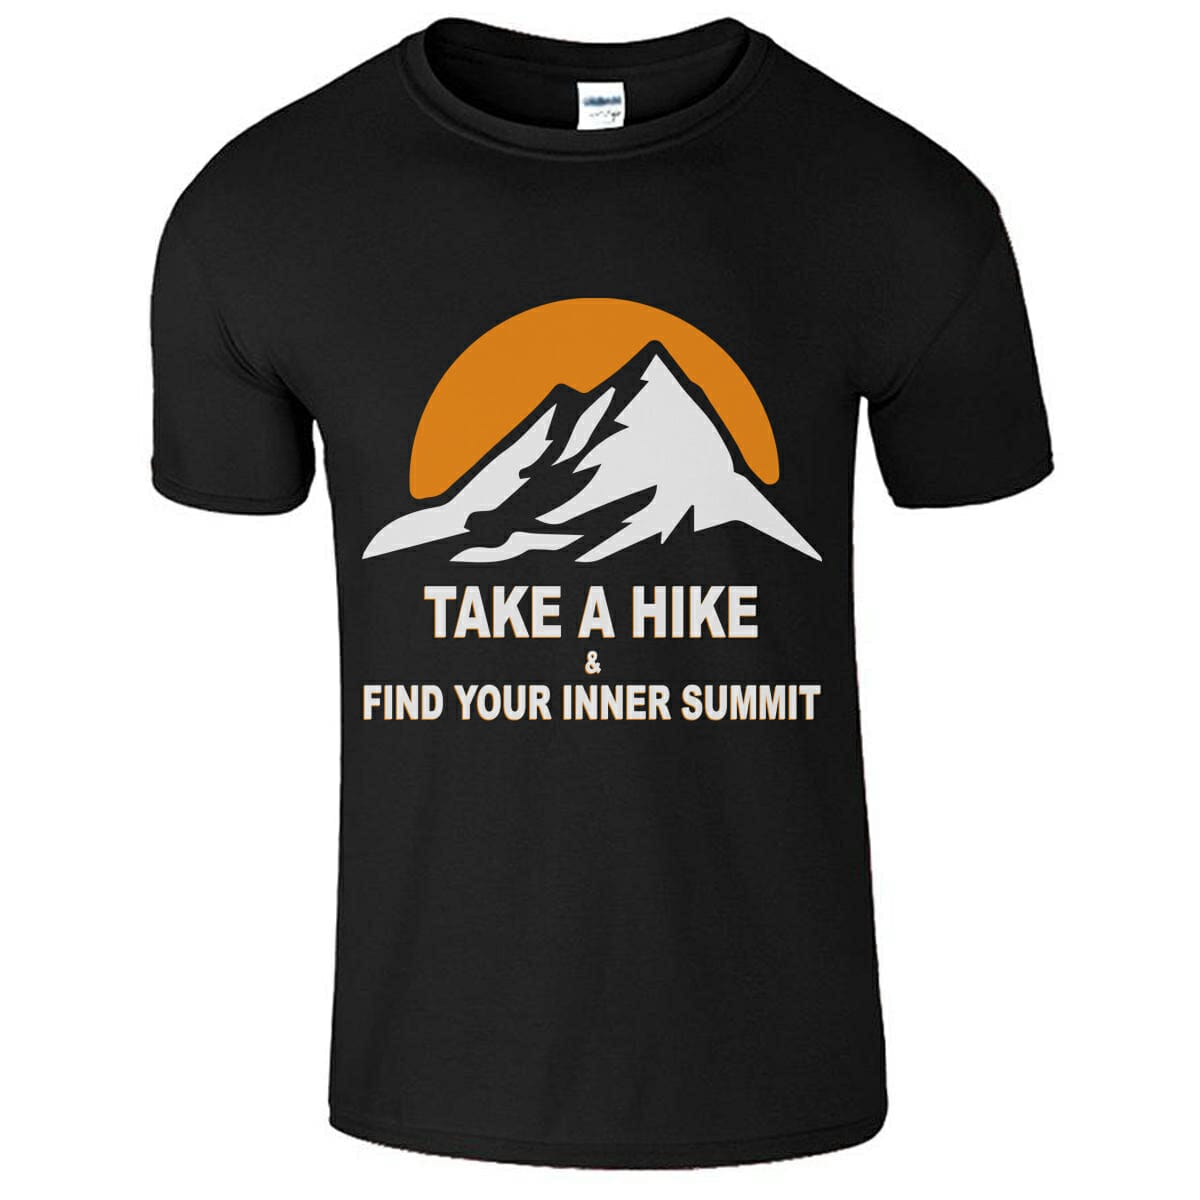 Take A Hike & Find Your Inner Summit T-Shirt Design